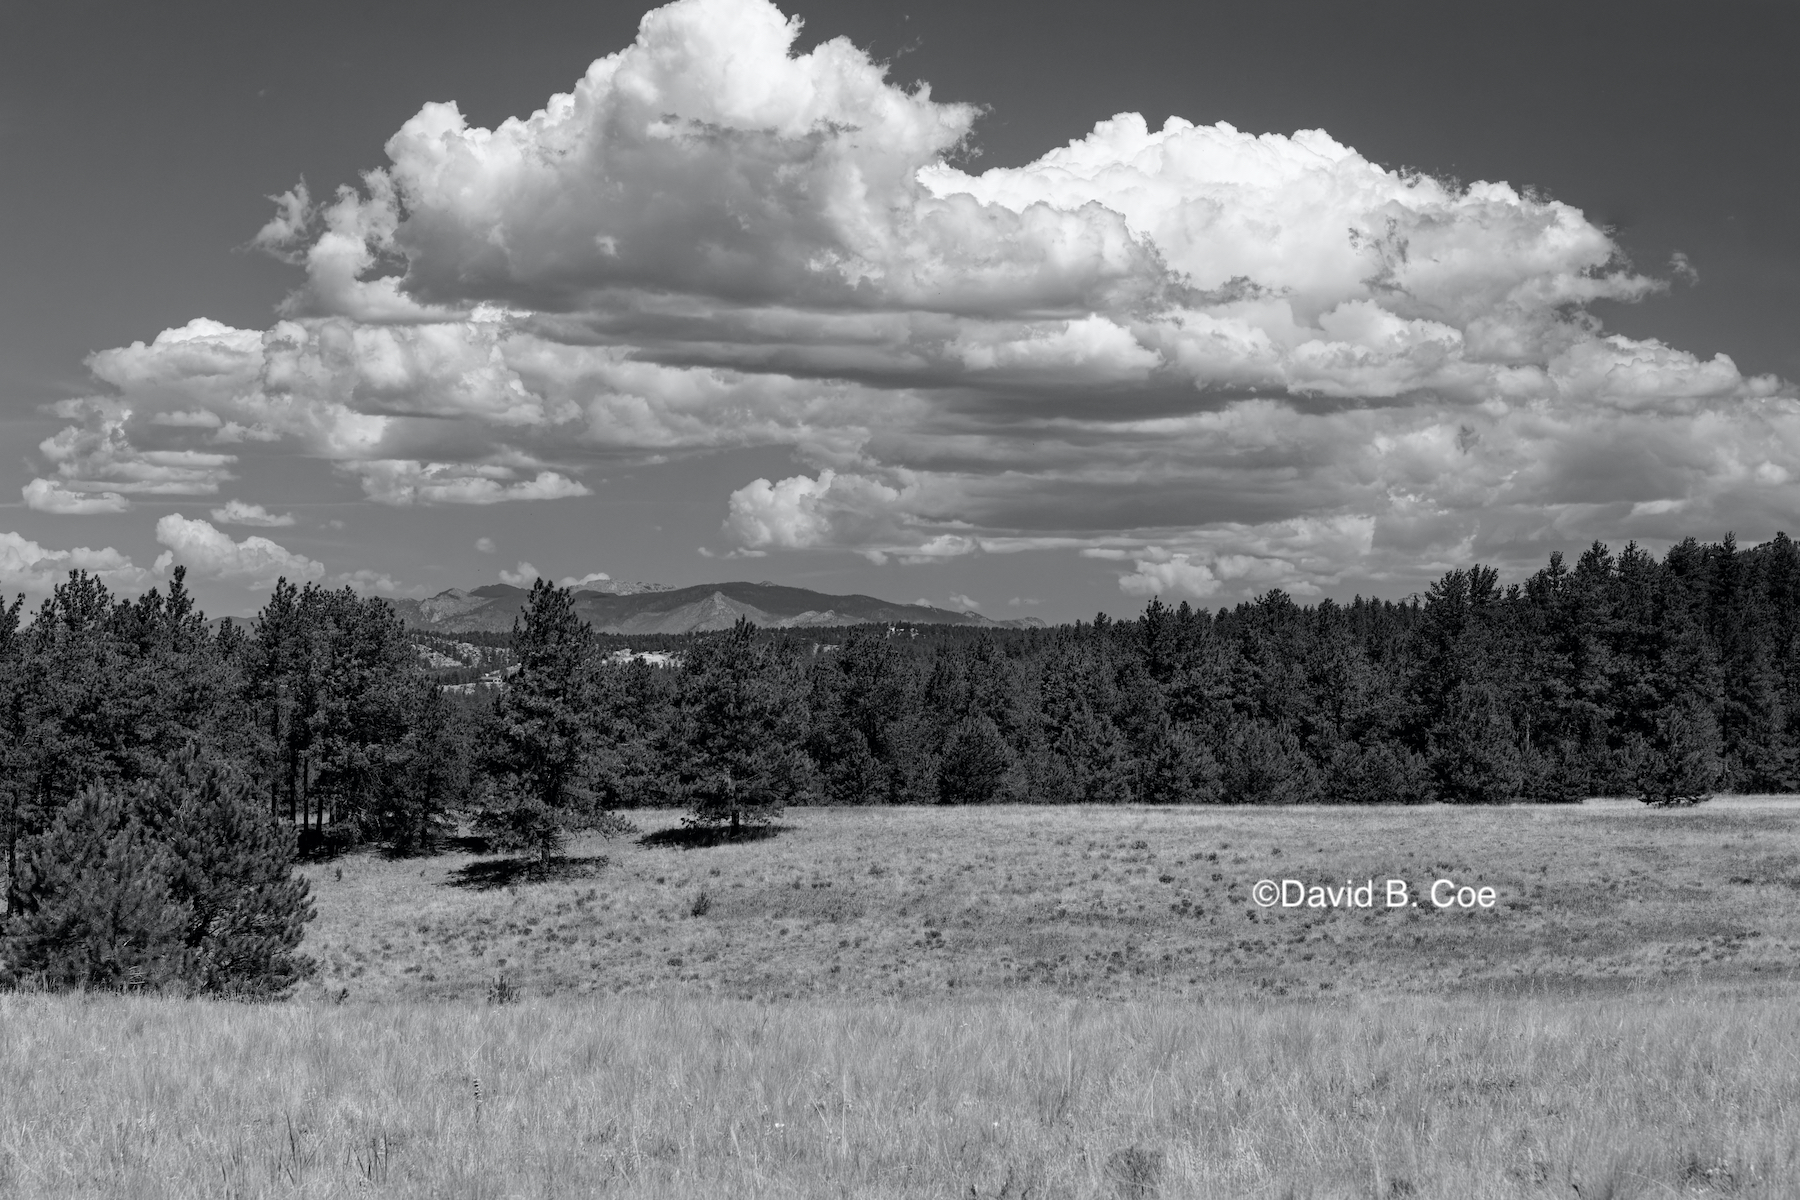 Florissant Fossil Beds NM, by David B. Coe